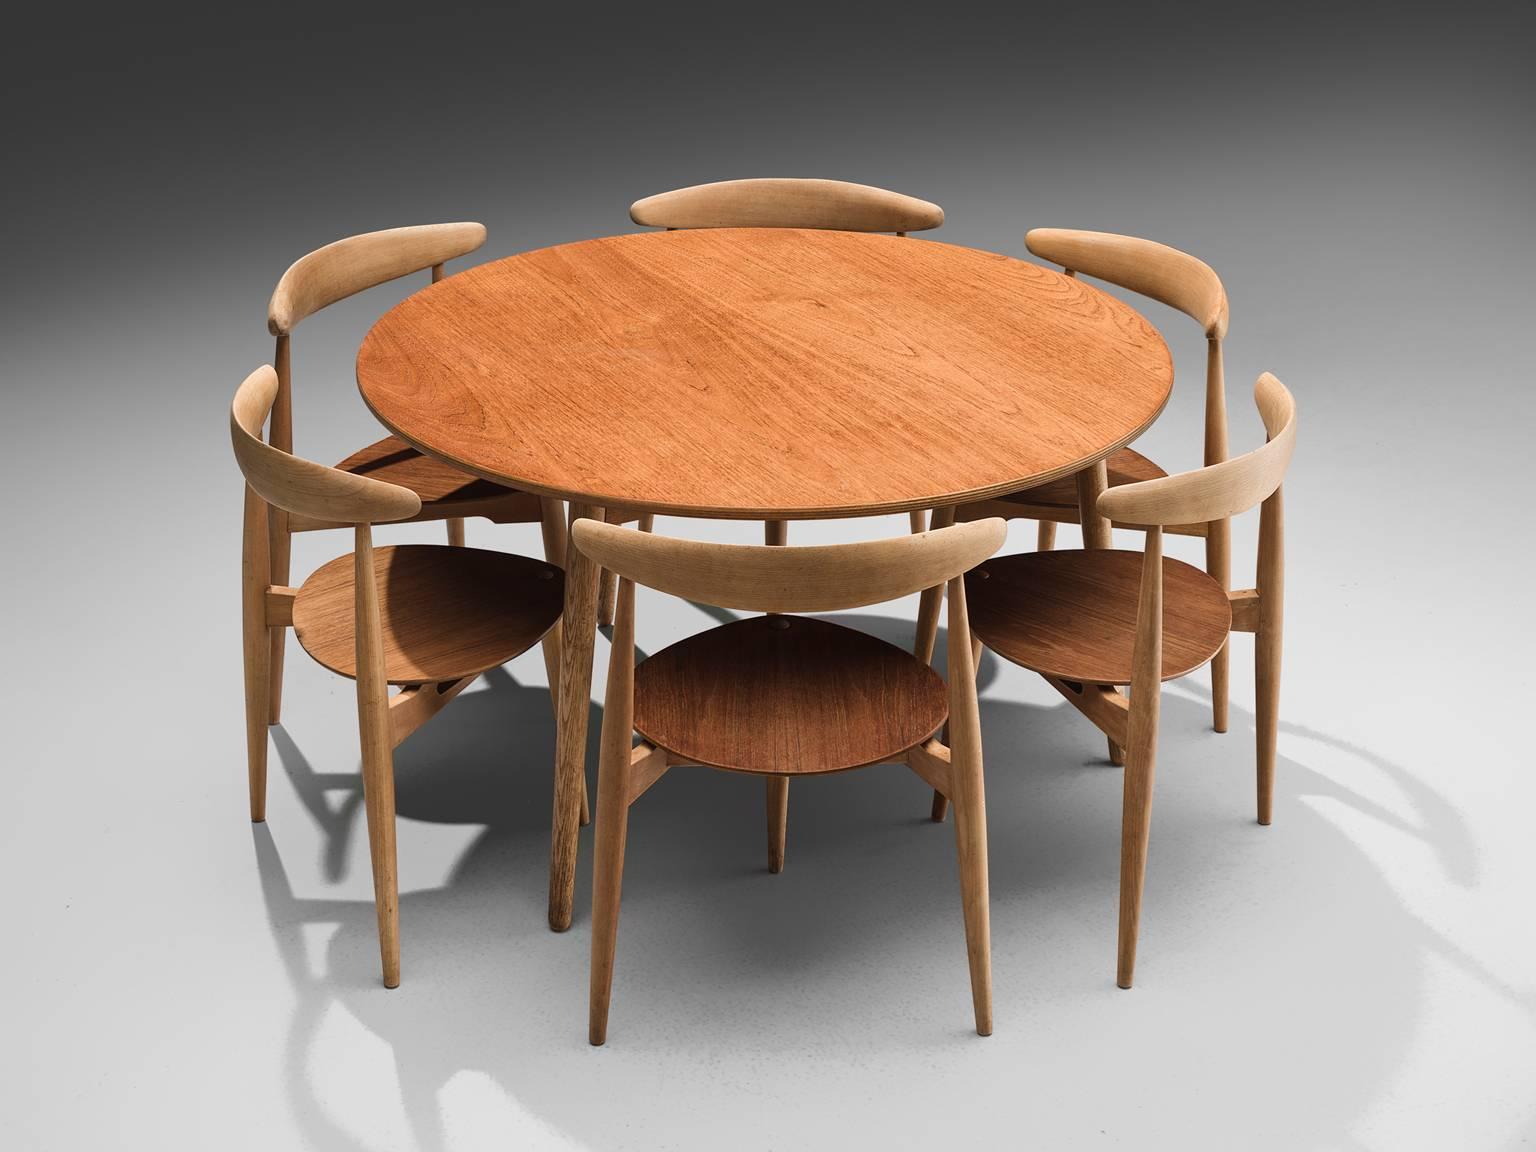 Hans Wegner for Fritz Hansen, heart set in teak and oak, Denmark, 1953.

This dining set by Hans Wegner is designed to take up as little space as possible whilst at the same time having a simplistic, natural and timeless aesthetics. The chairs by